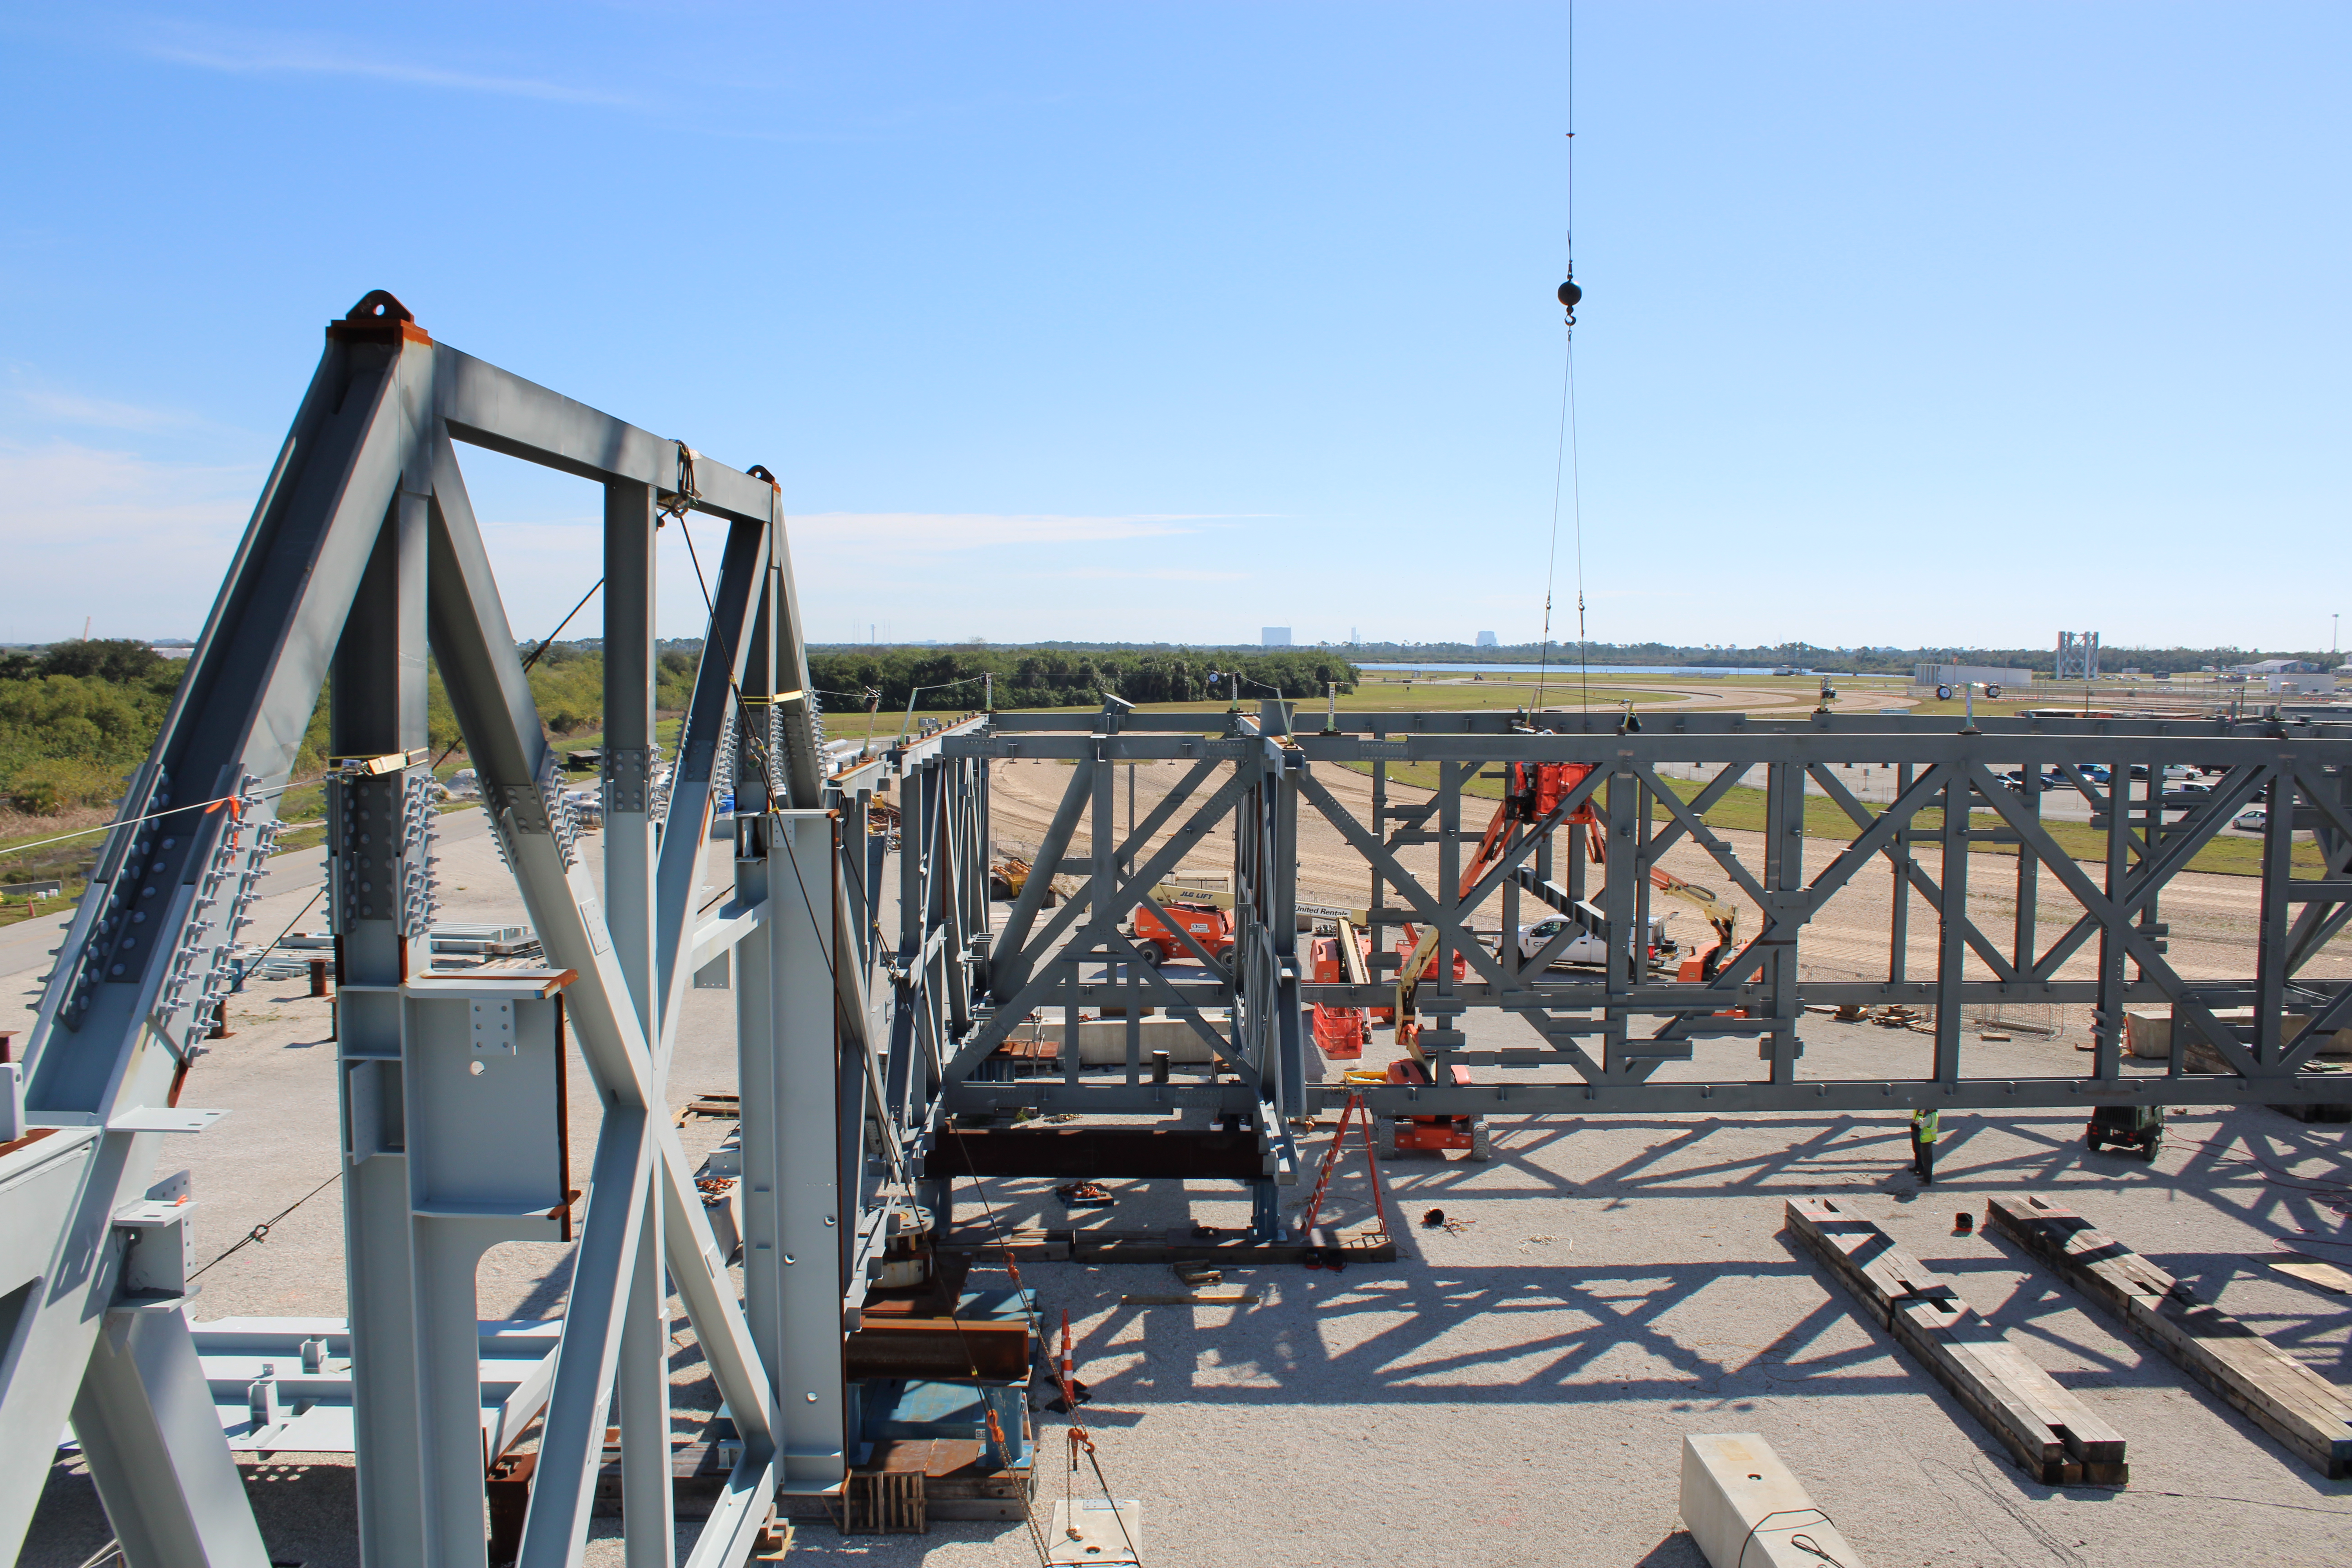 View of progress on the Mobile Launcher 2 base at Kennedy Space Center. 